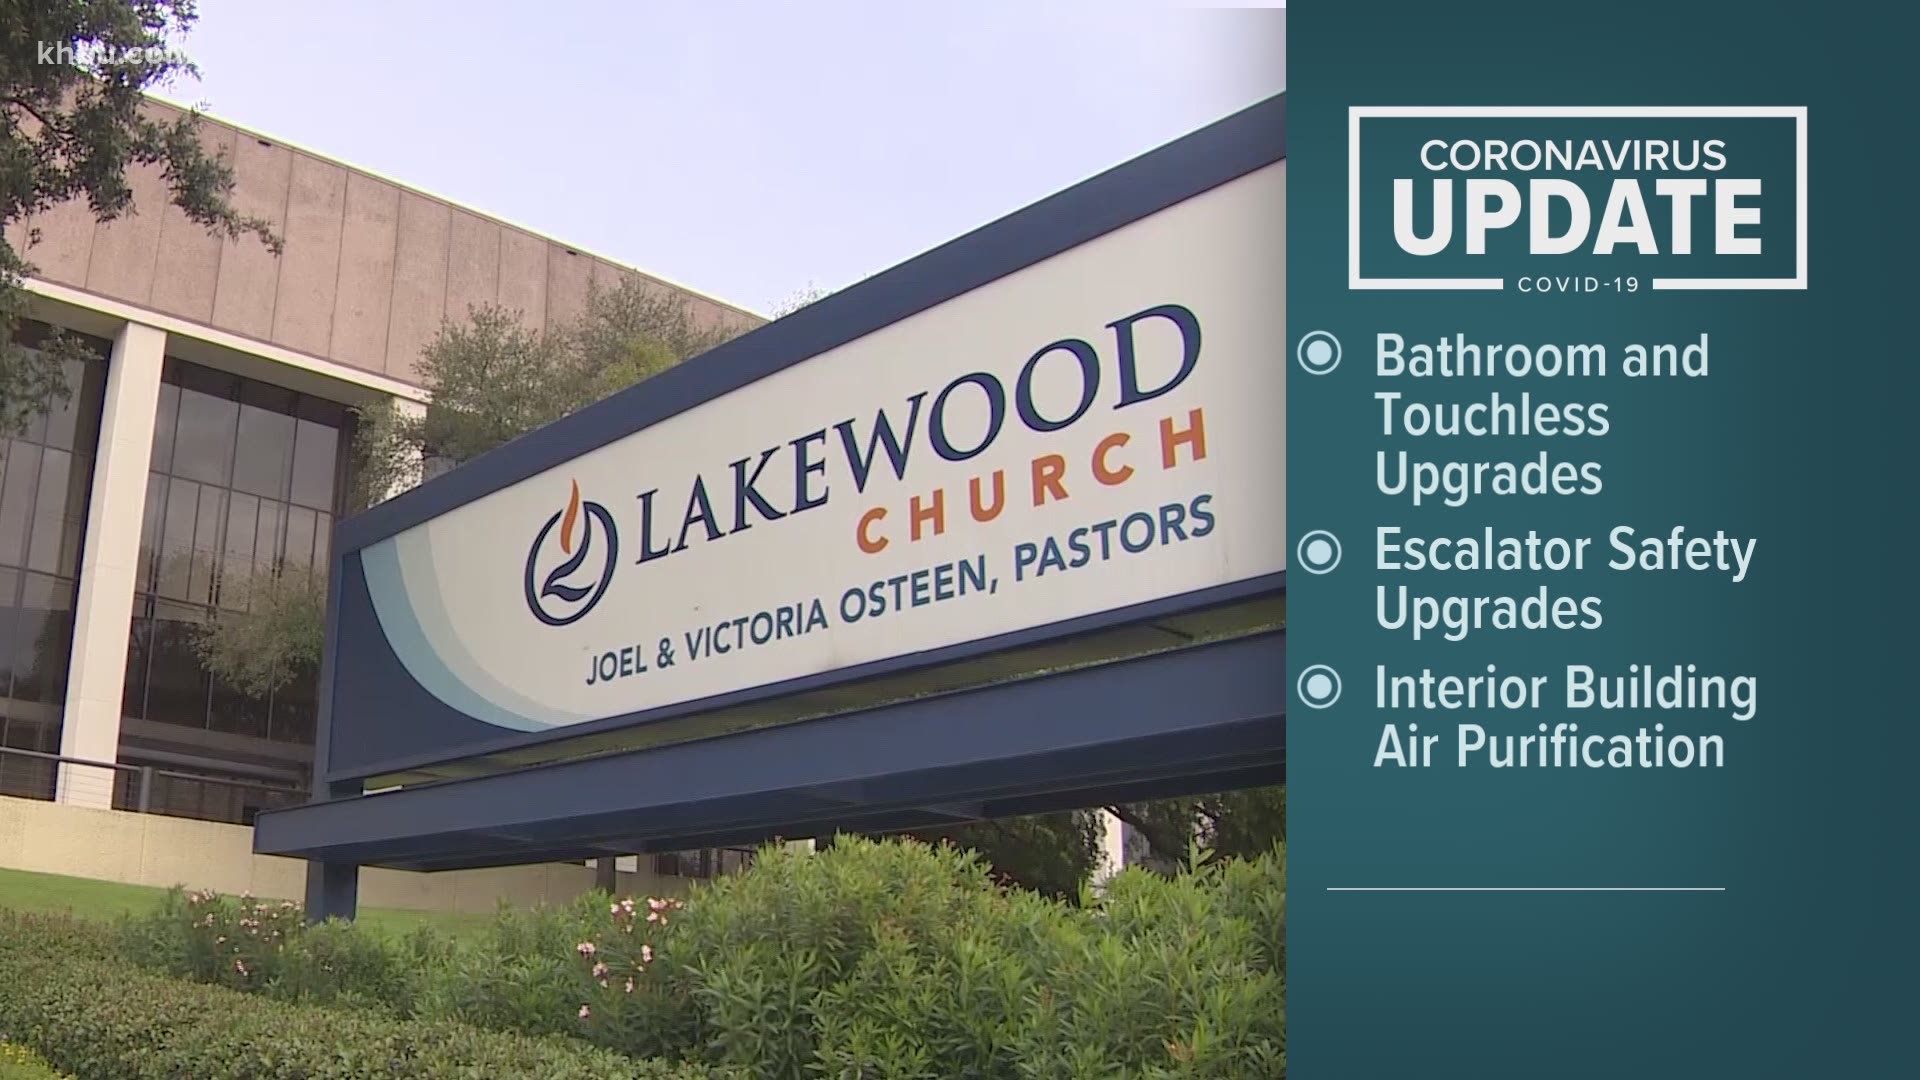 In-person worship will begin on Oct. 18 at Lakewood Church in Houston.